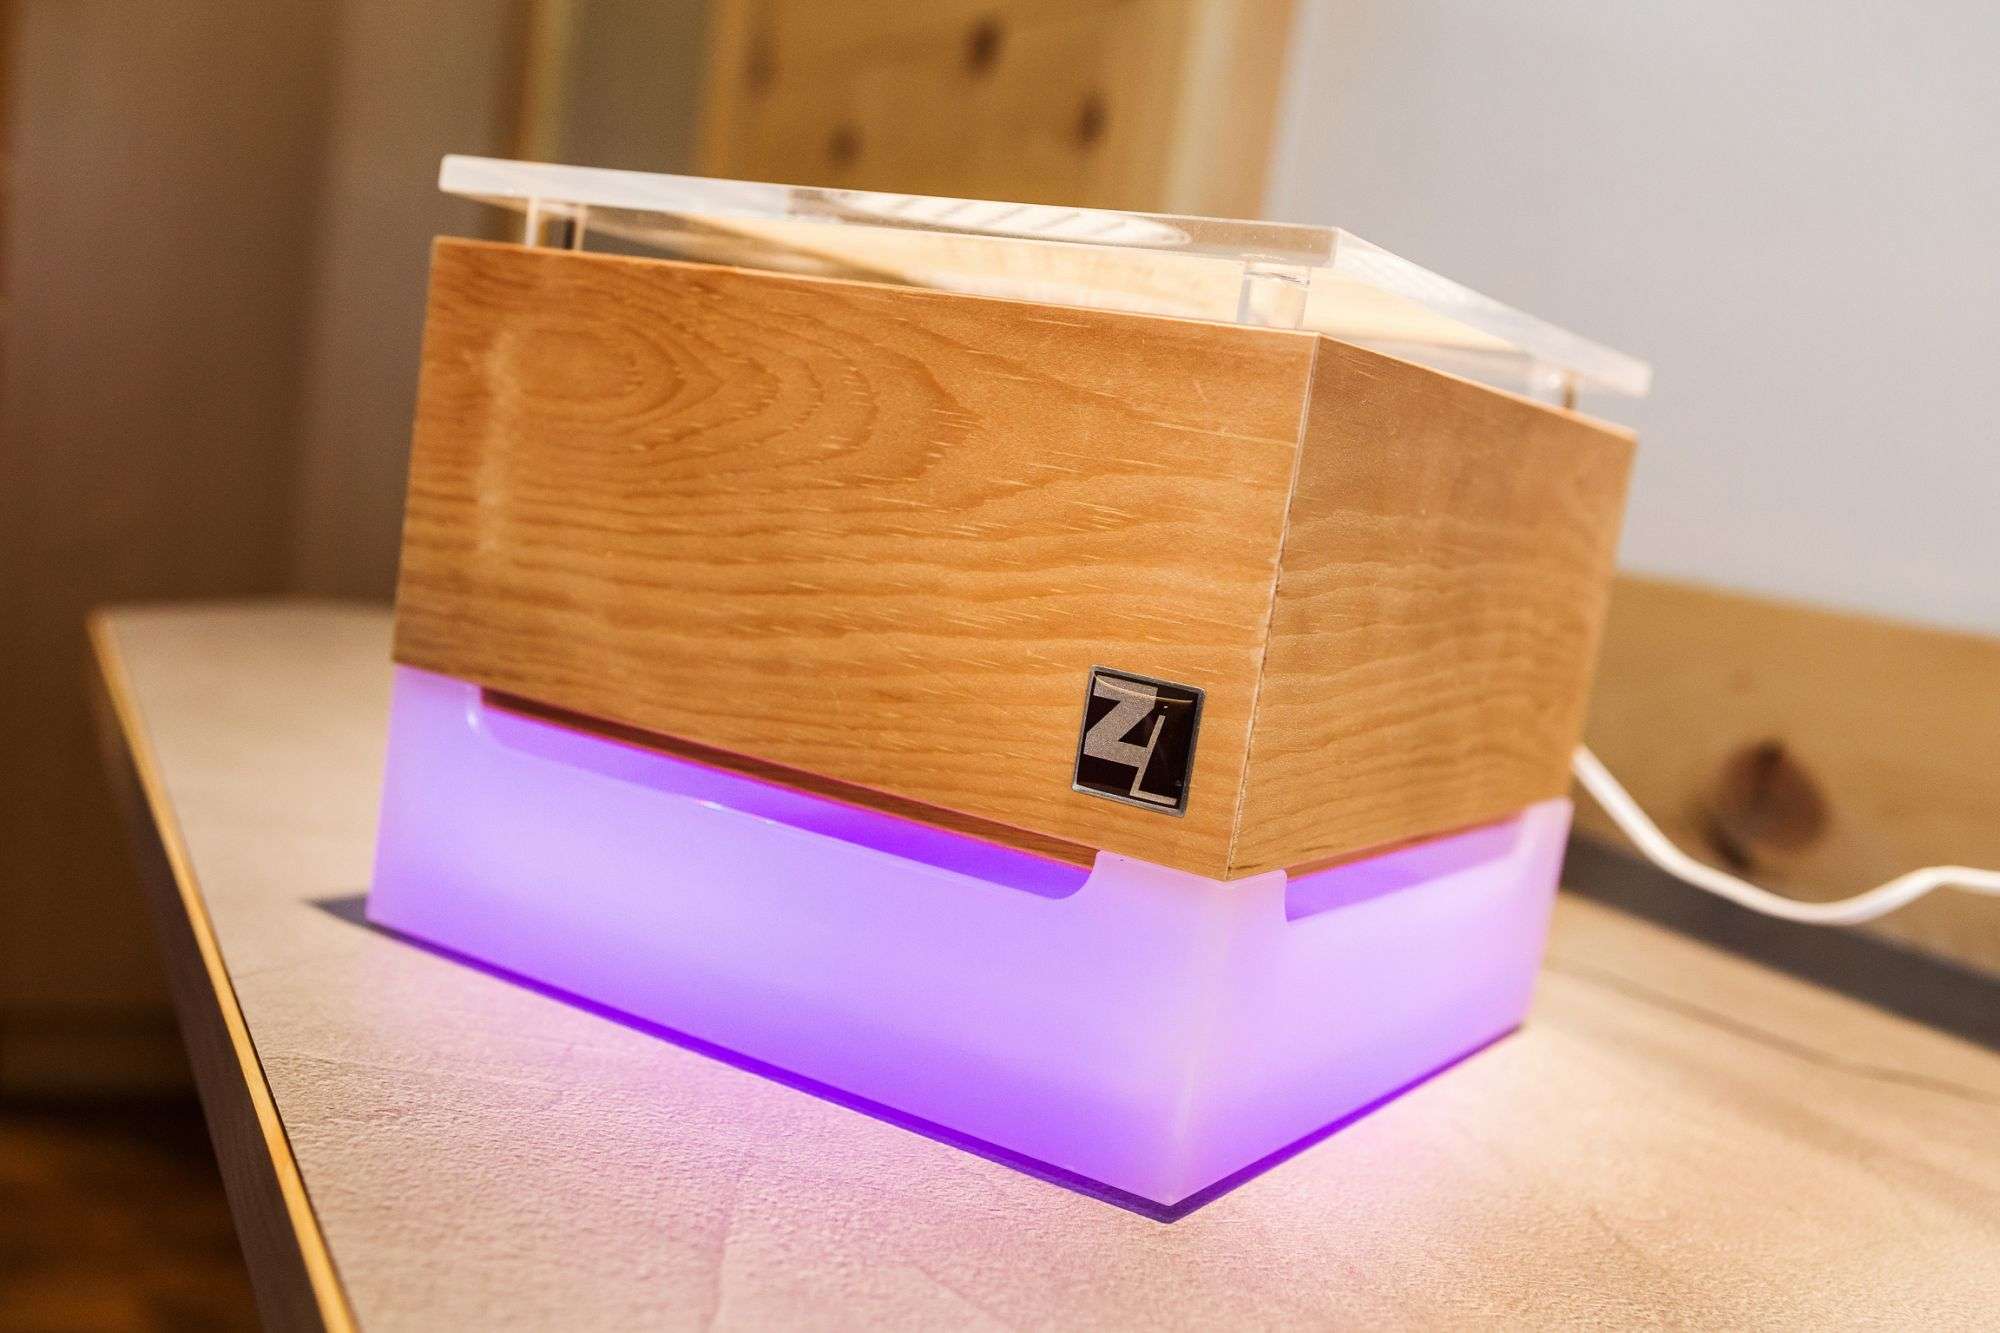 A cube made of wood, the lower part glows violet